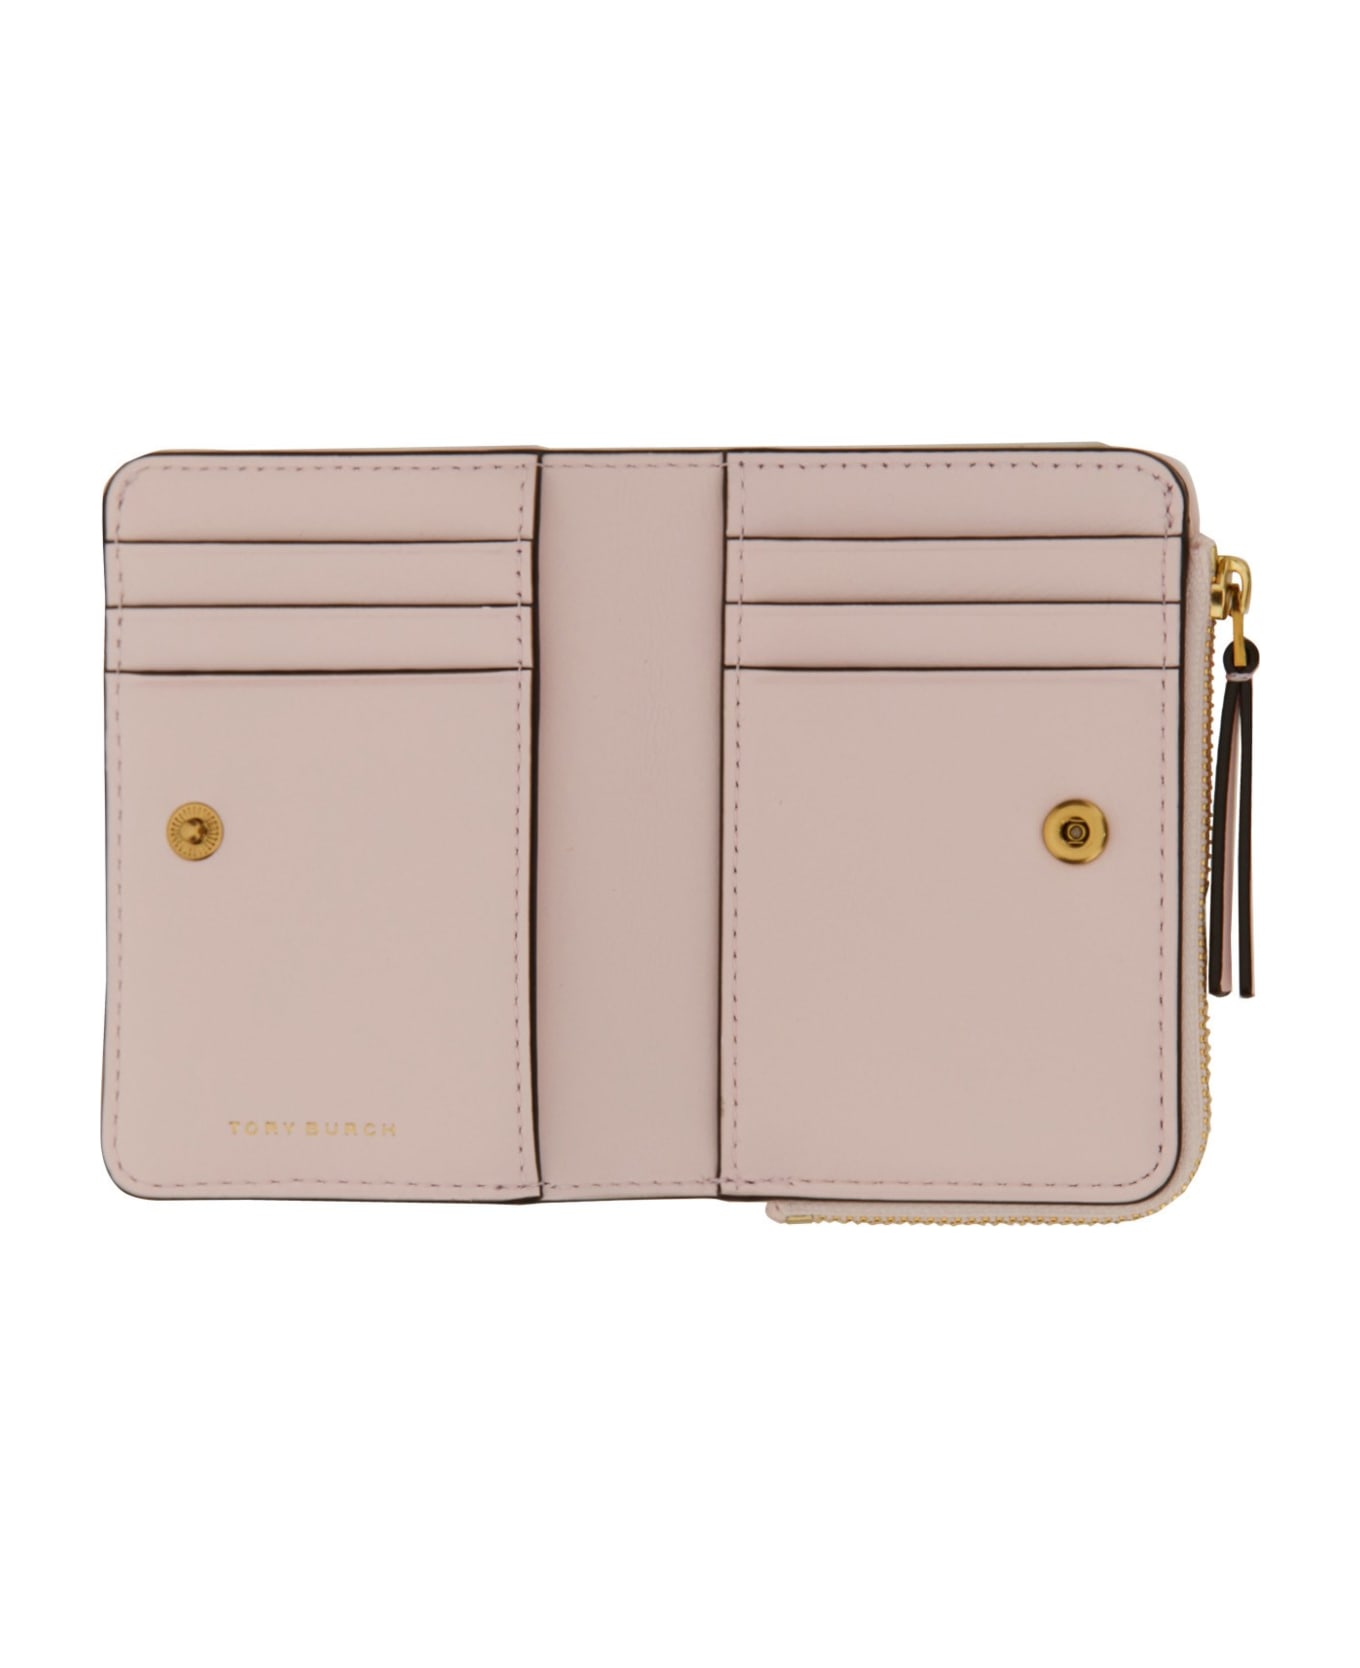 Tory Burch Double Wallet - ROSA